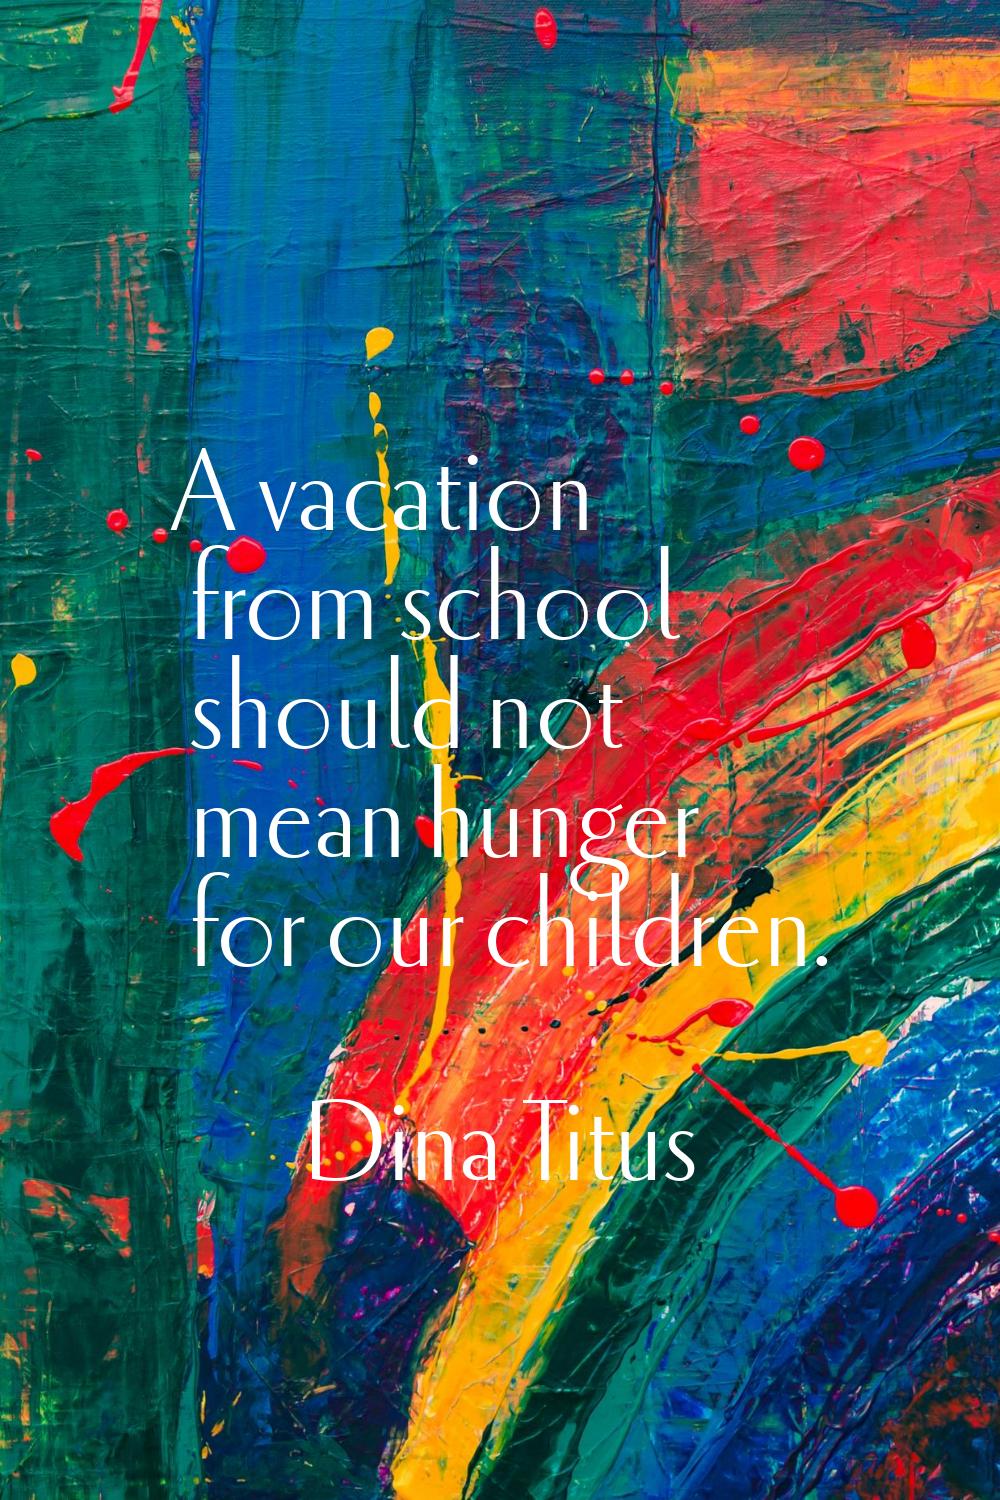 A vacation from school should not mean hunger for our children.